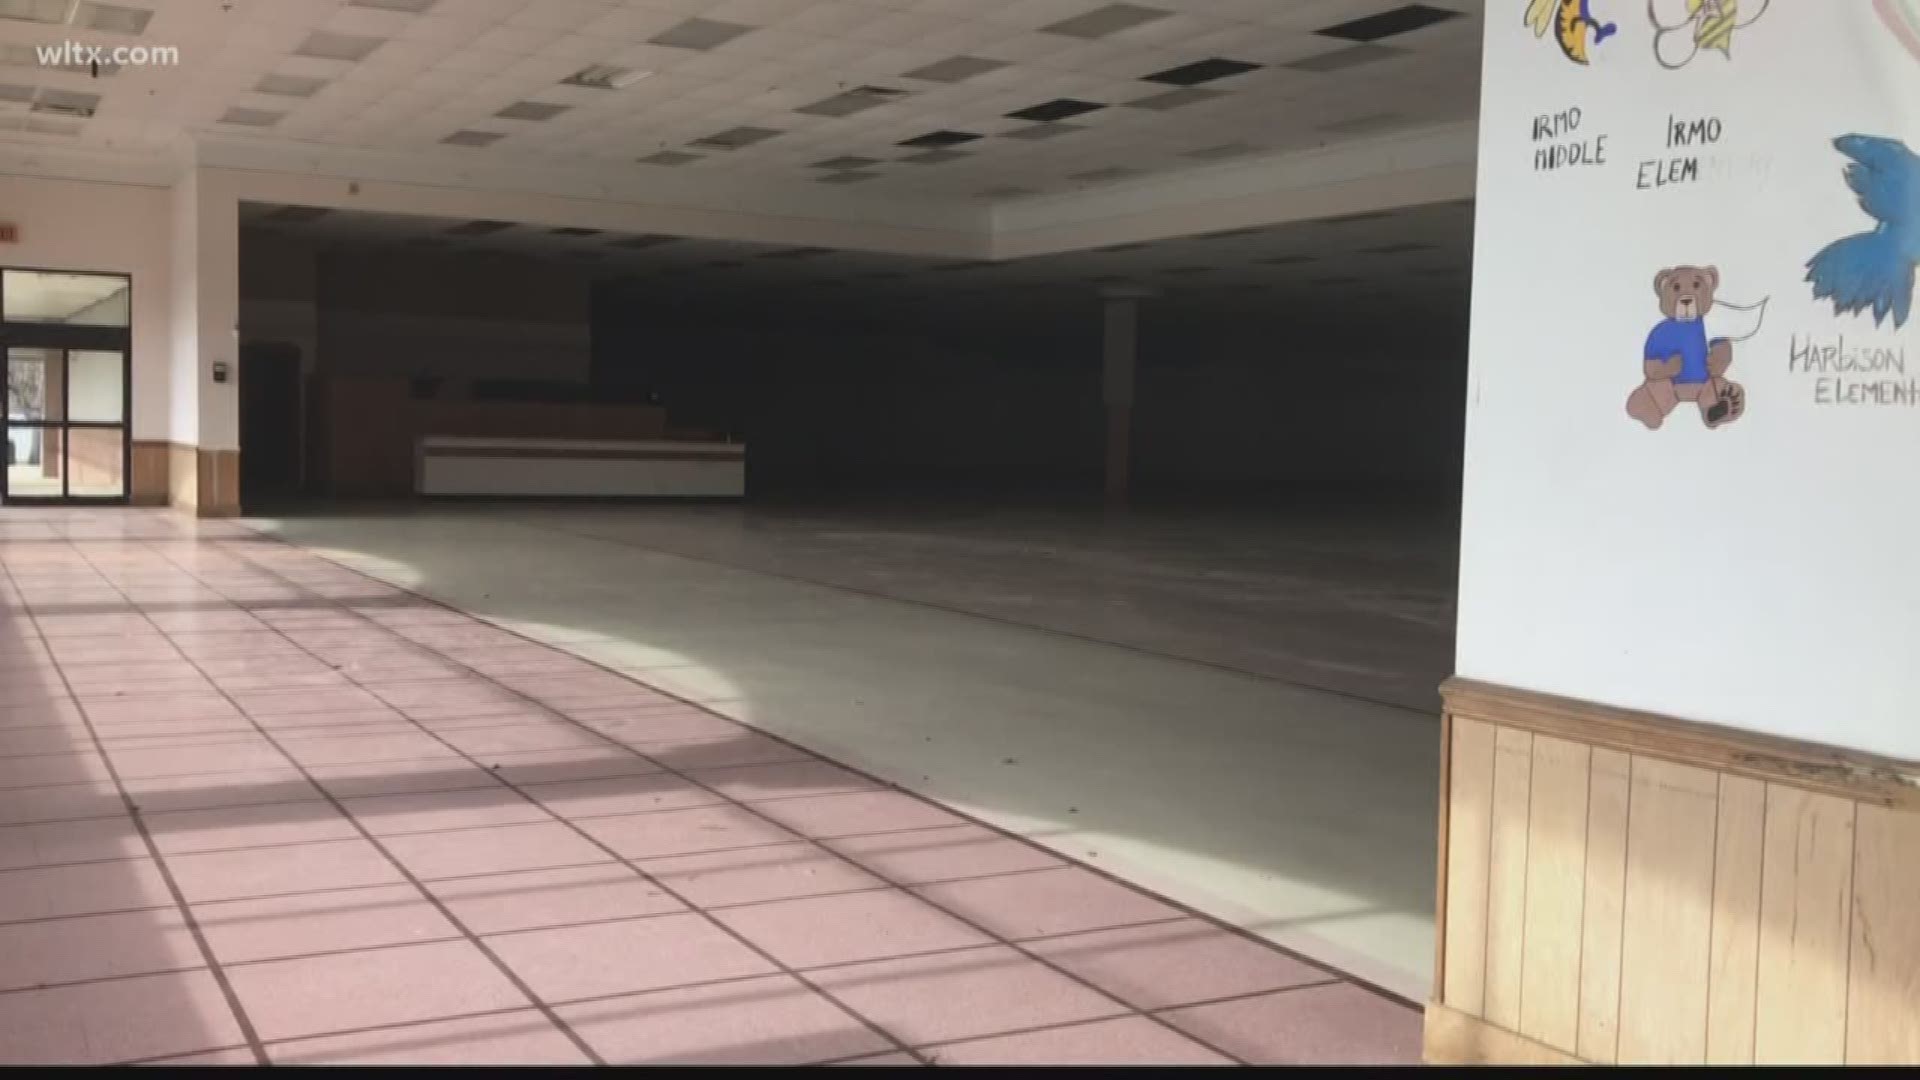 Stars And Strikes Family Entertainment Coming To Irmo With Arcade Bowling Alley Wltx Com